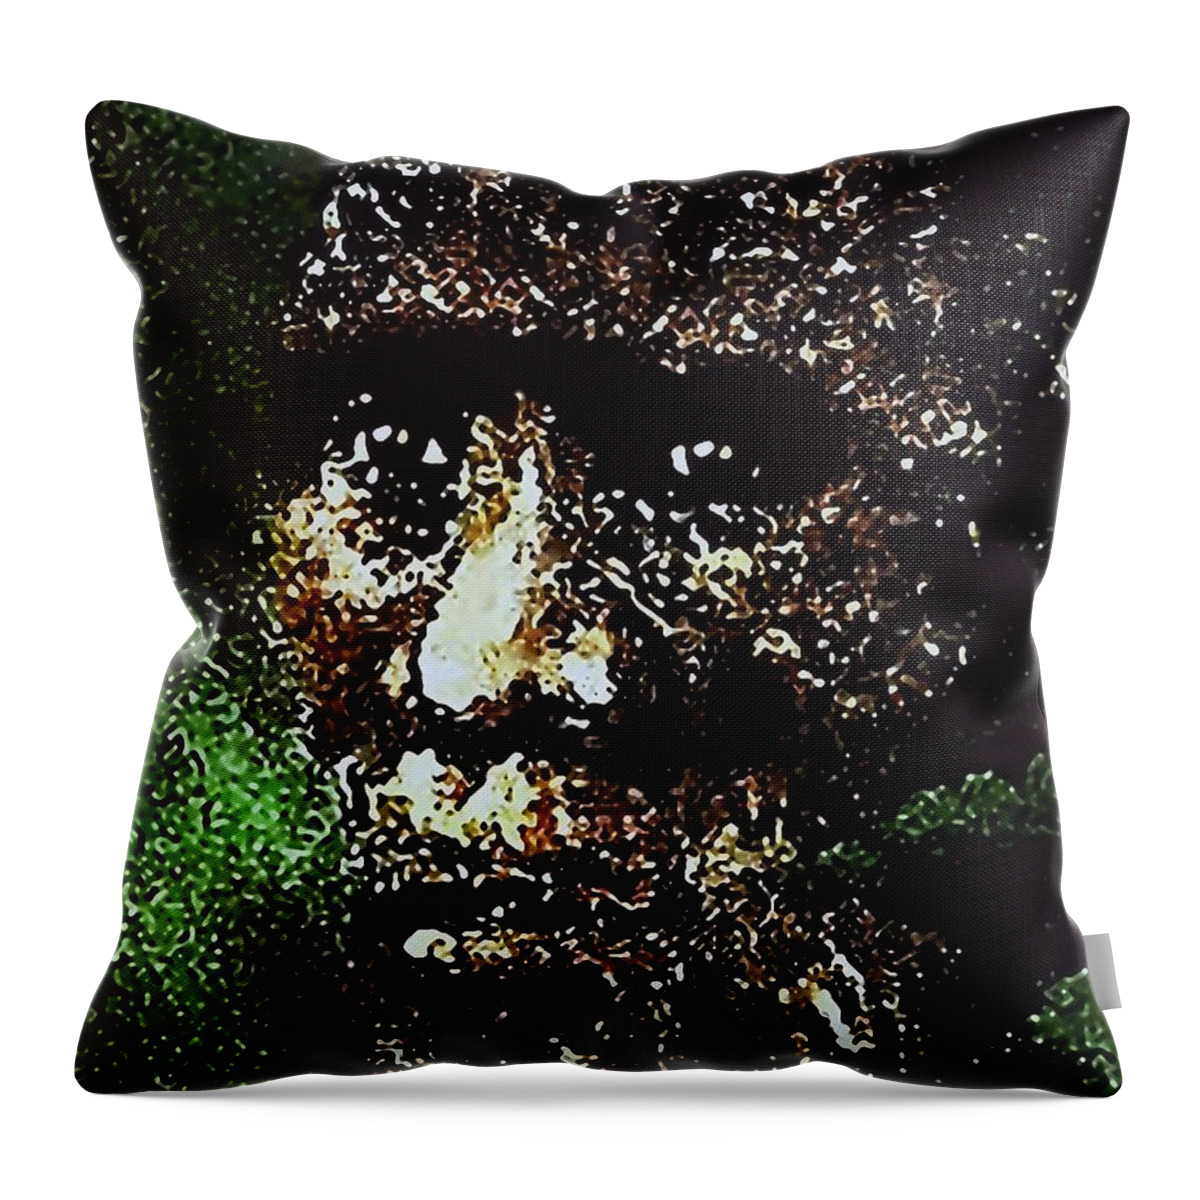 Bigfoot Throw Pillow featuring the painting Bigfoot Mystery by Hartmut Jager